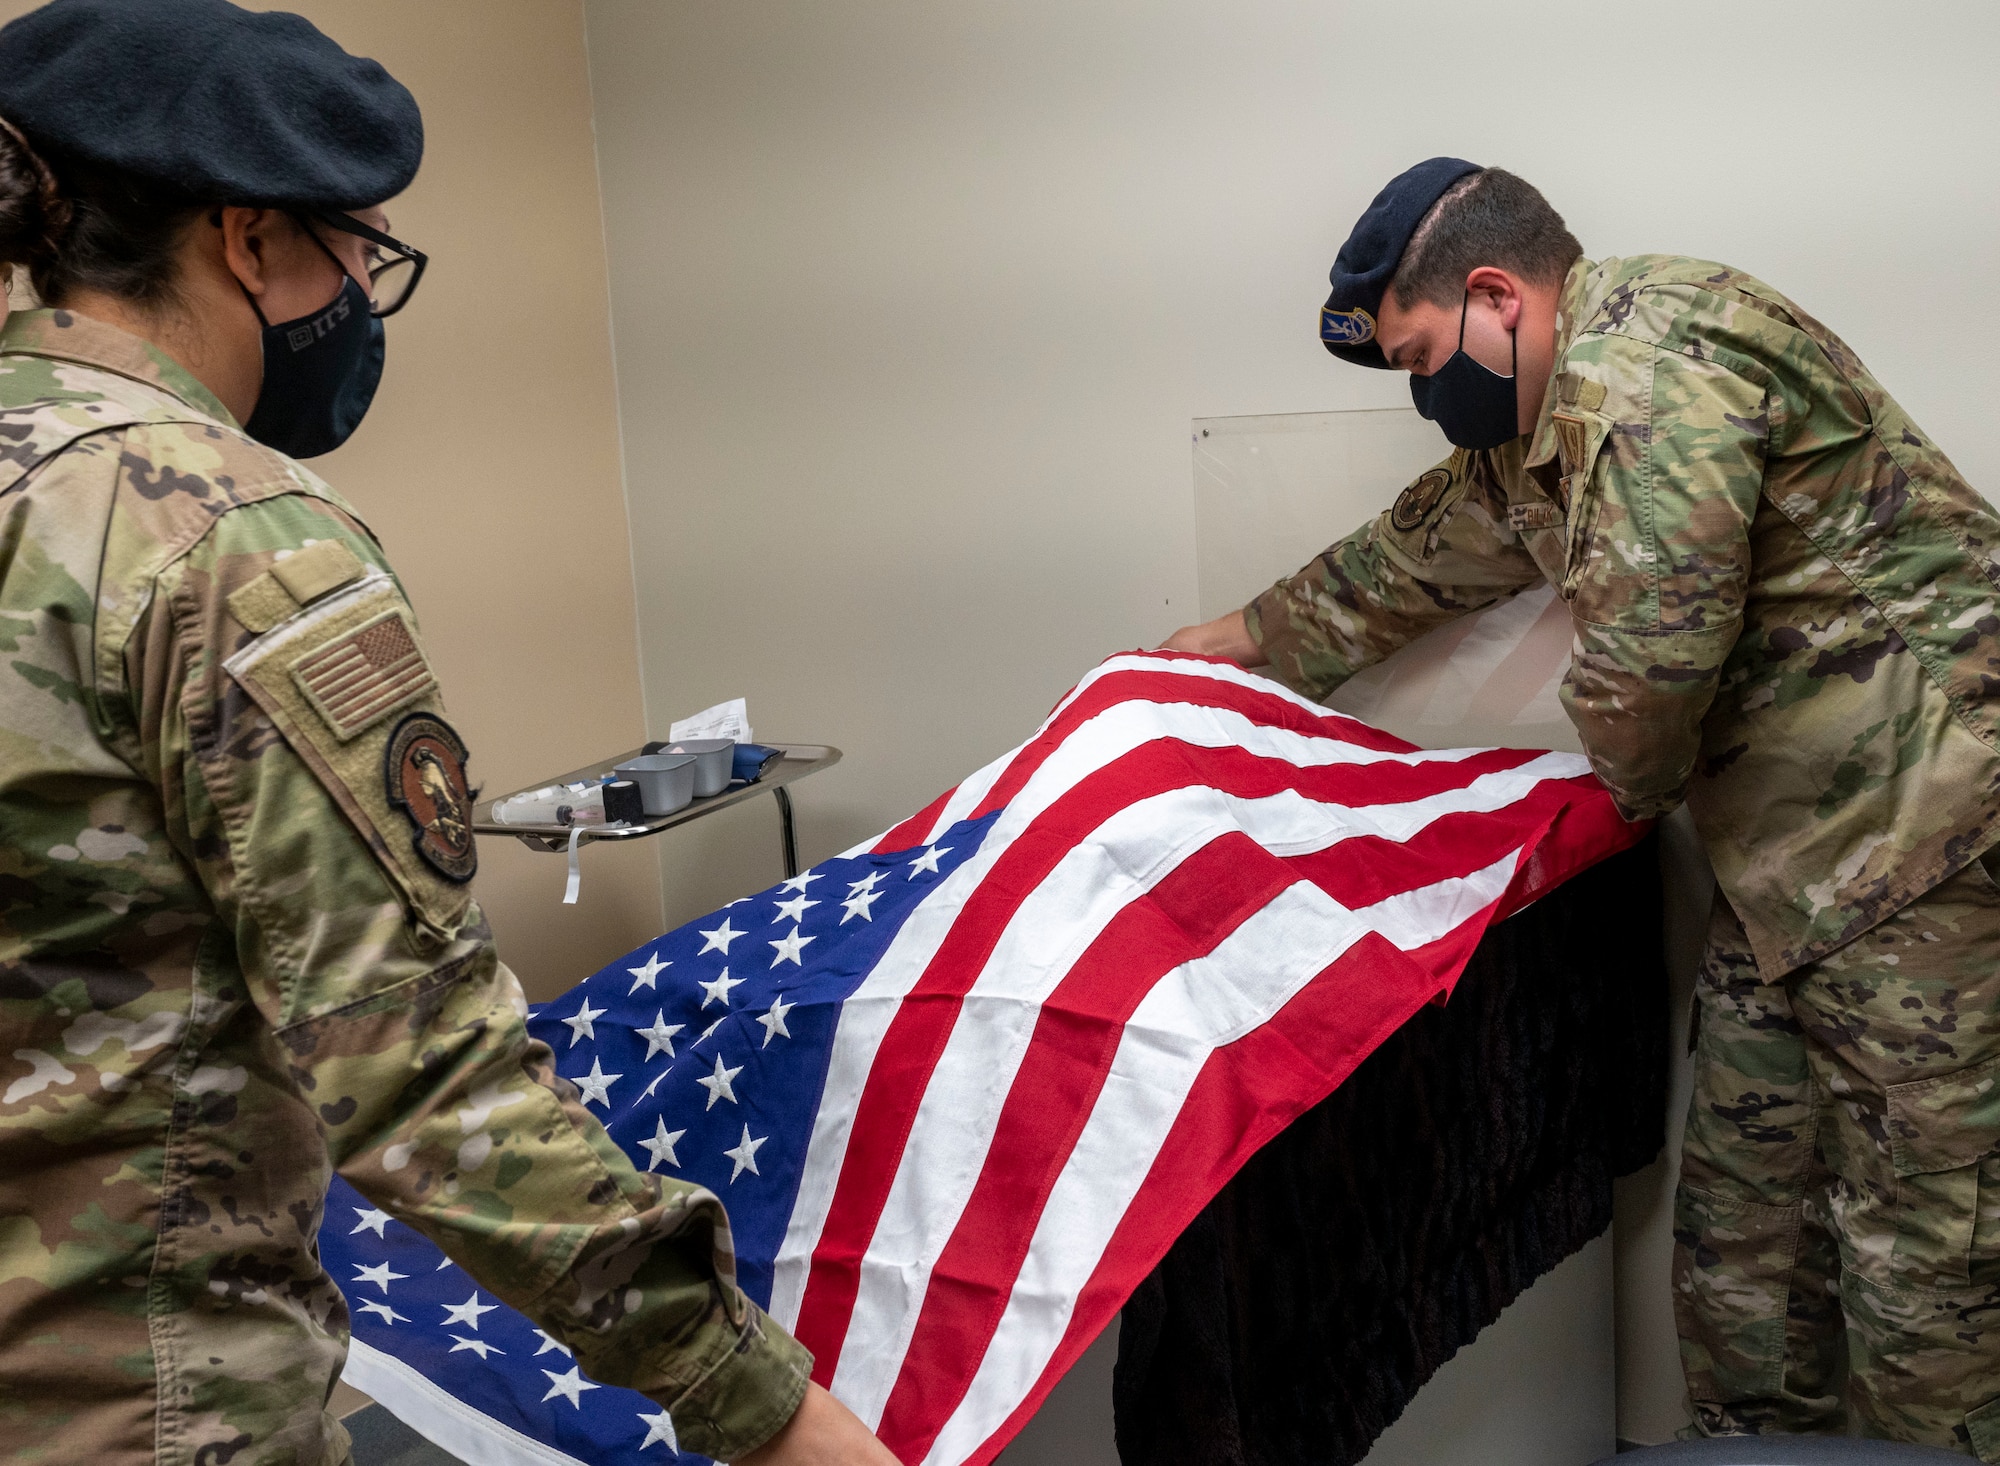 Staff Sgts. Theresa Braack and Dylan Bulick, both 436th Security Forces Squadron military working dog handlers, drape a flag over retired MWD Kali after she was humanely euthanized at the veterinary treatment facility on Dover Air Force Base, Delaware, April 22, 2021. Following seven years of service, Kali was euthanized after suffering from a tumor in her abdomen. (U.S. Air Force photo by Airman 1st Class Cydney Lee)